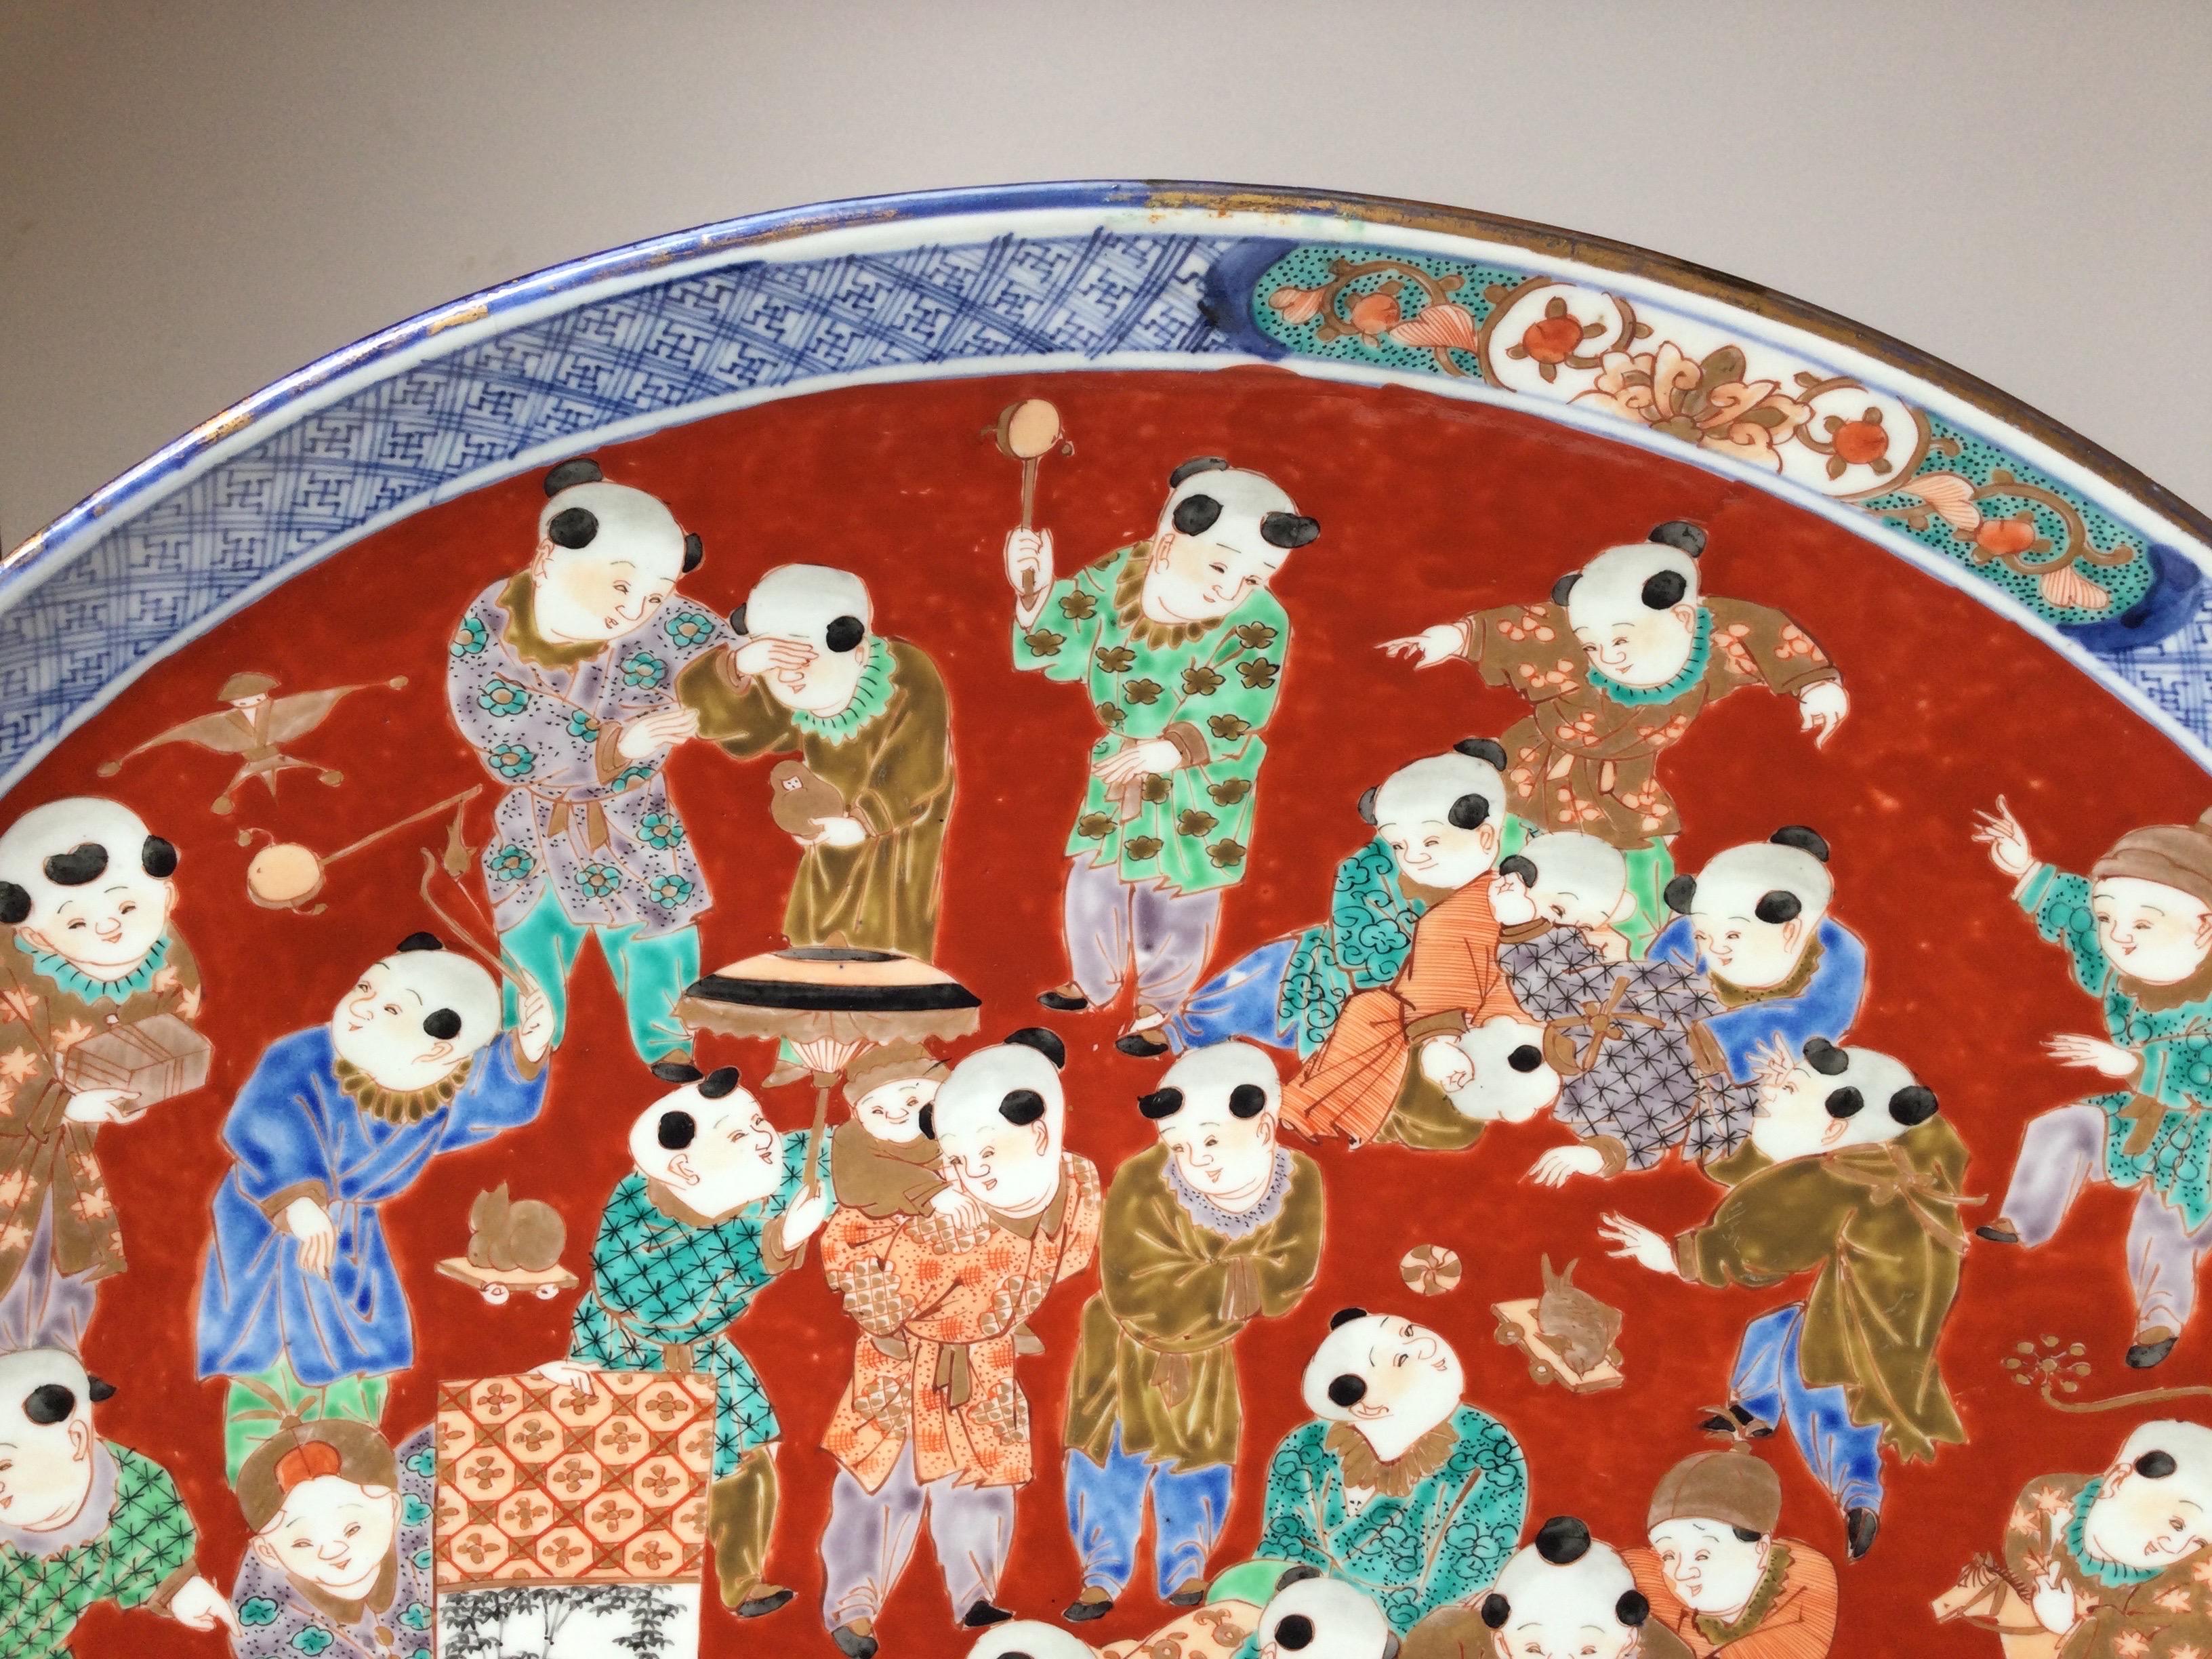 A large 22 inch diameter porcelain charge, Japan, 1880's. The unique and vibrant decoration of Japanese children playing, all in elegant brightly colored robs. The red and blue main colors of Imari Porcelain.